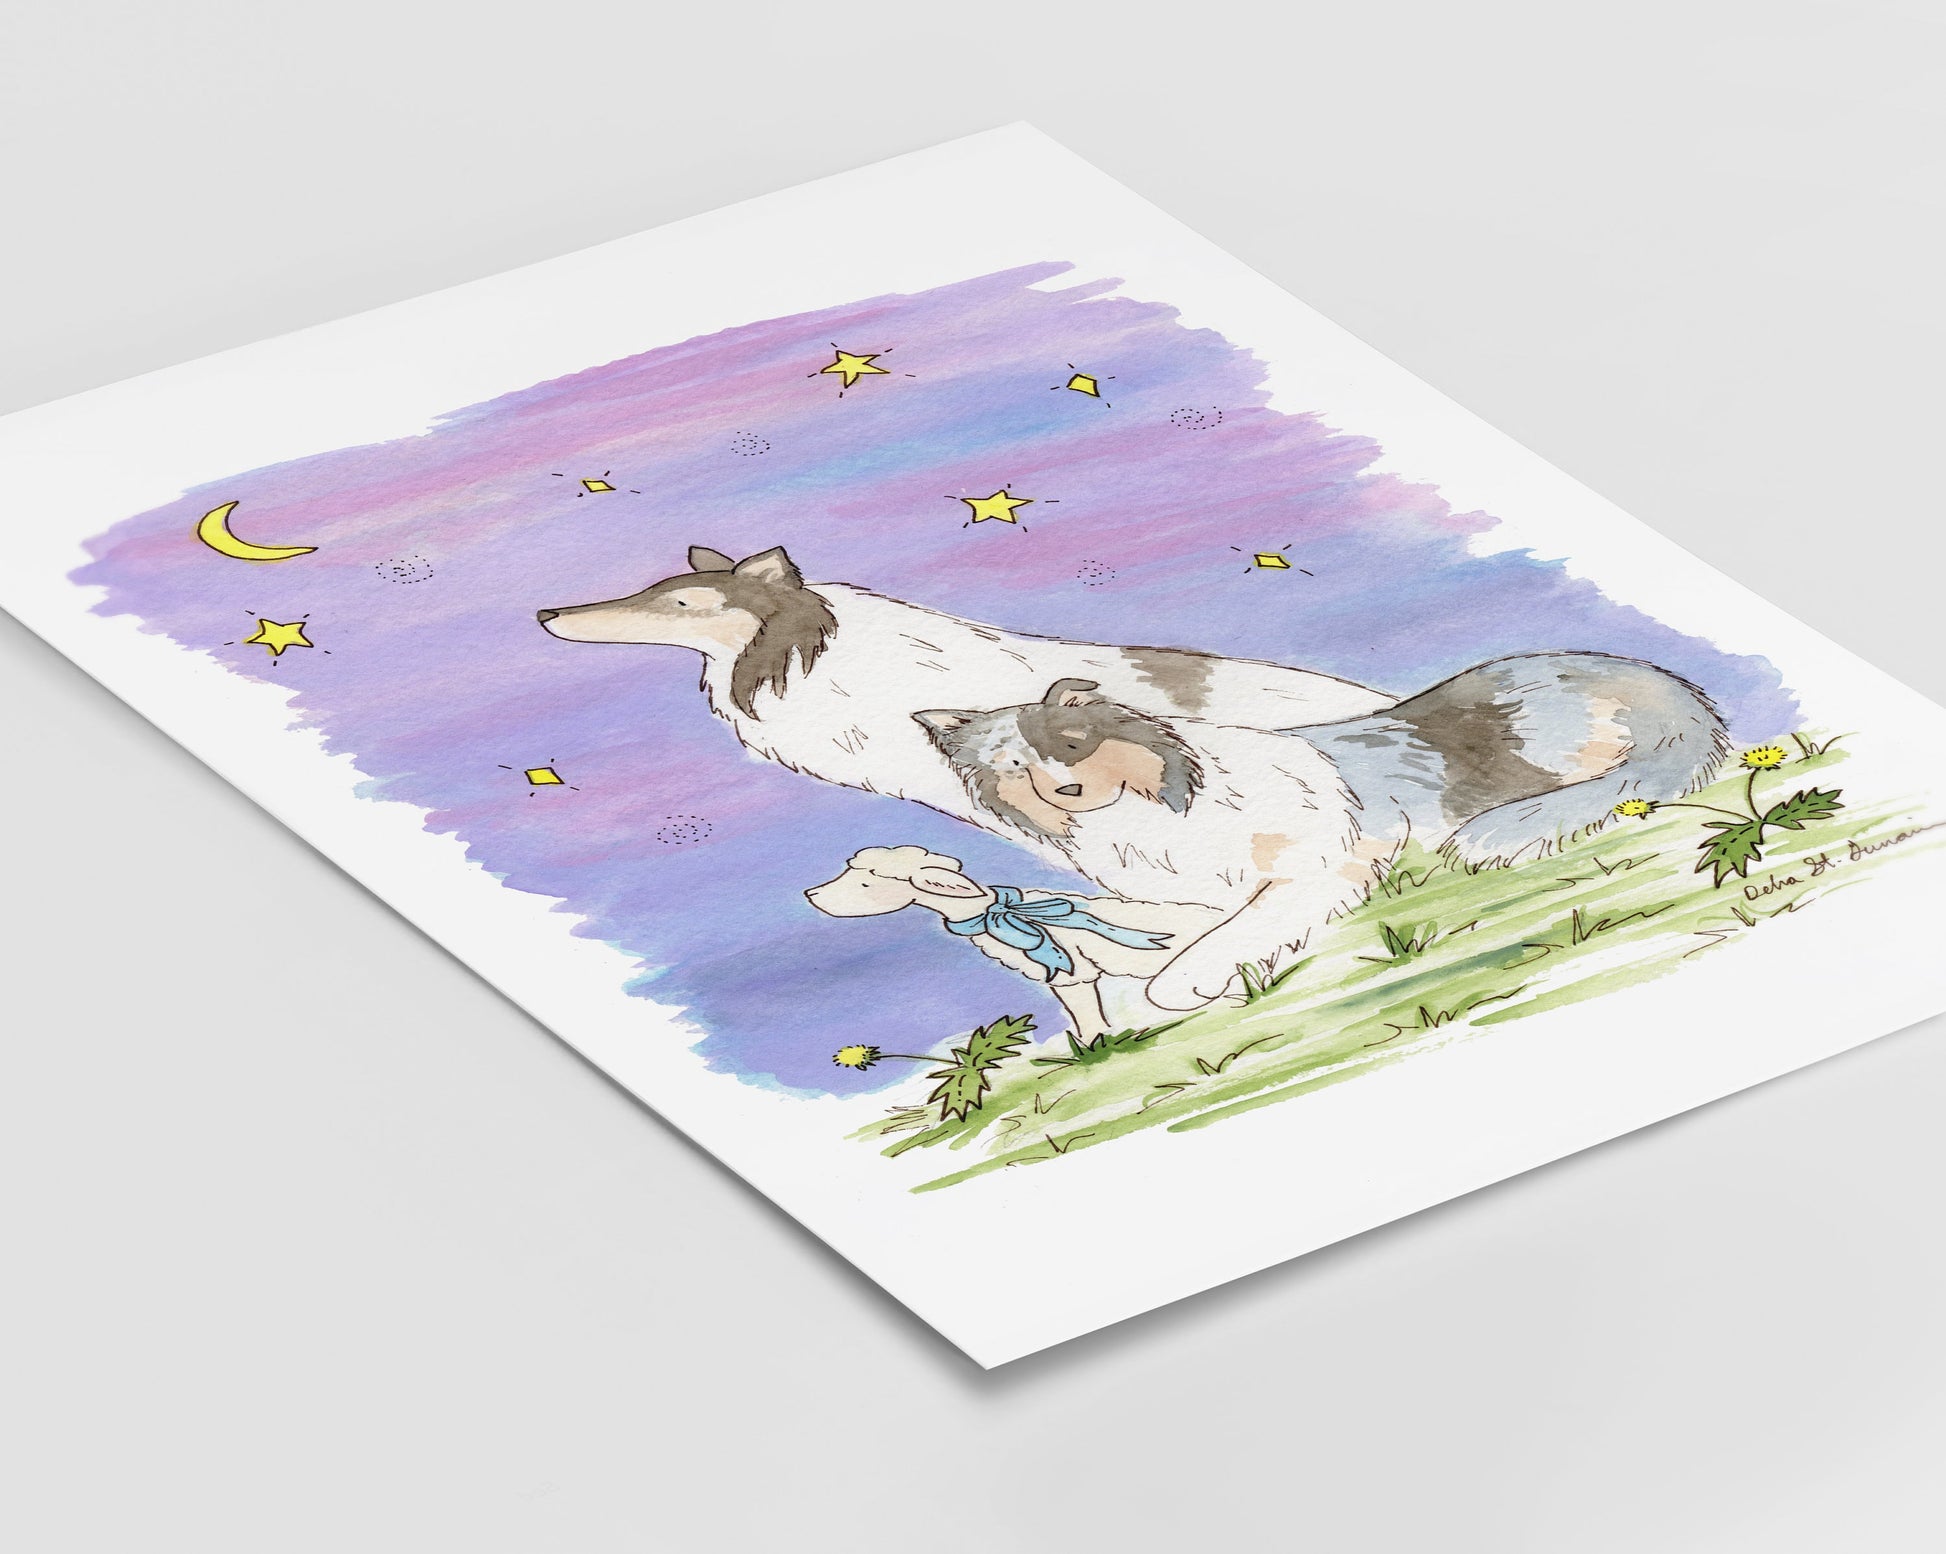 Collie Watercolor Art, Blue Merle Collies, The Wishing Star 2, Starry Sky Dog Art